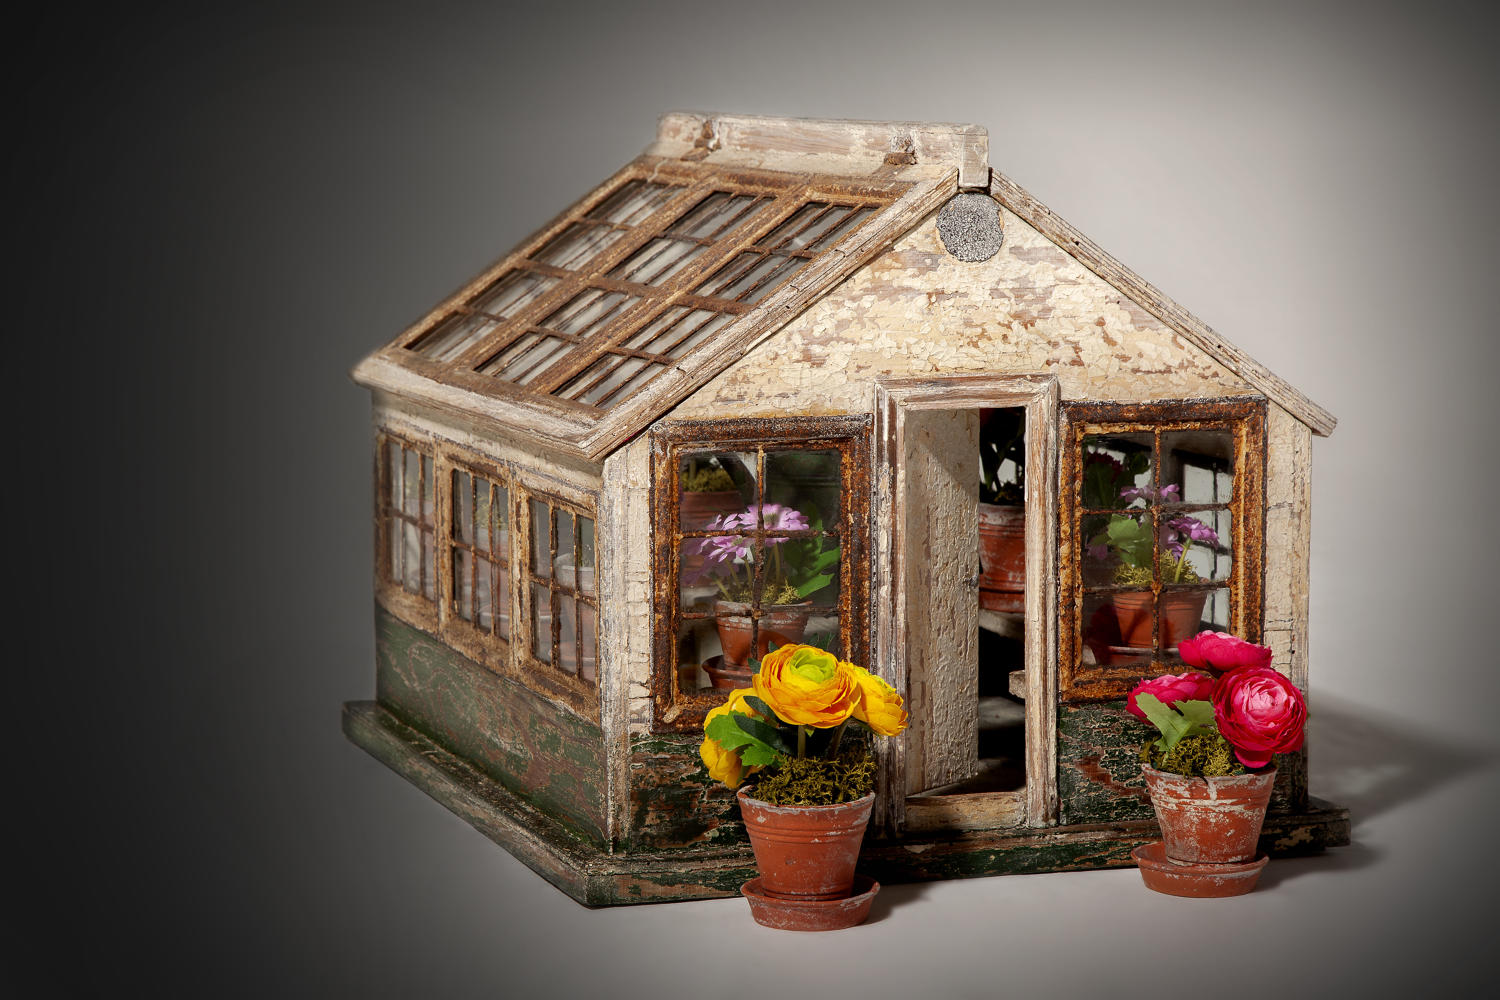 A rare 19th century model of a potting house